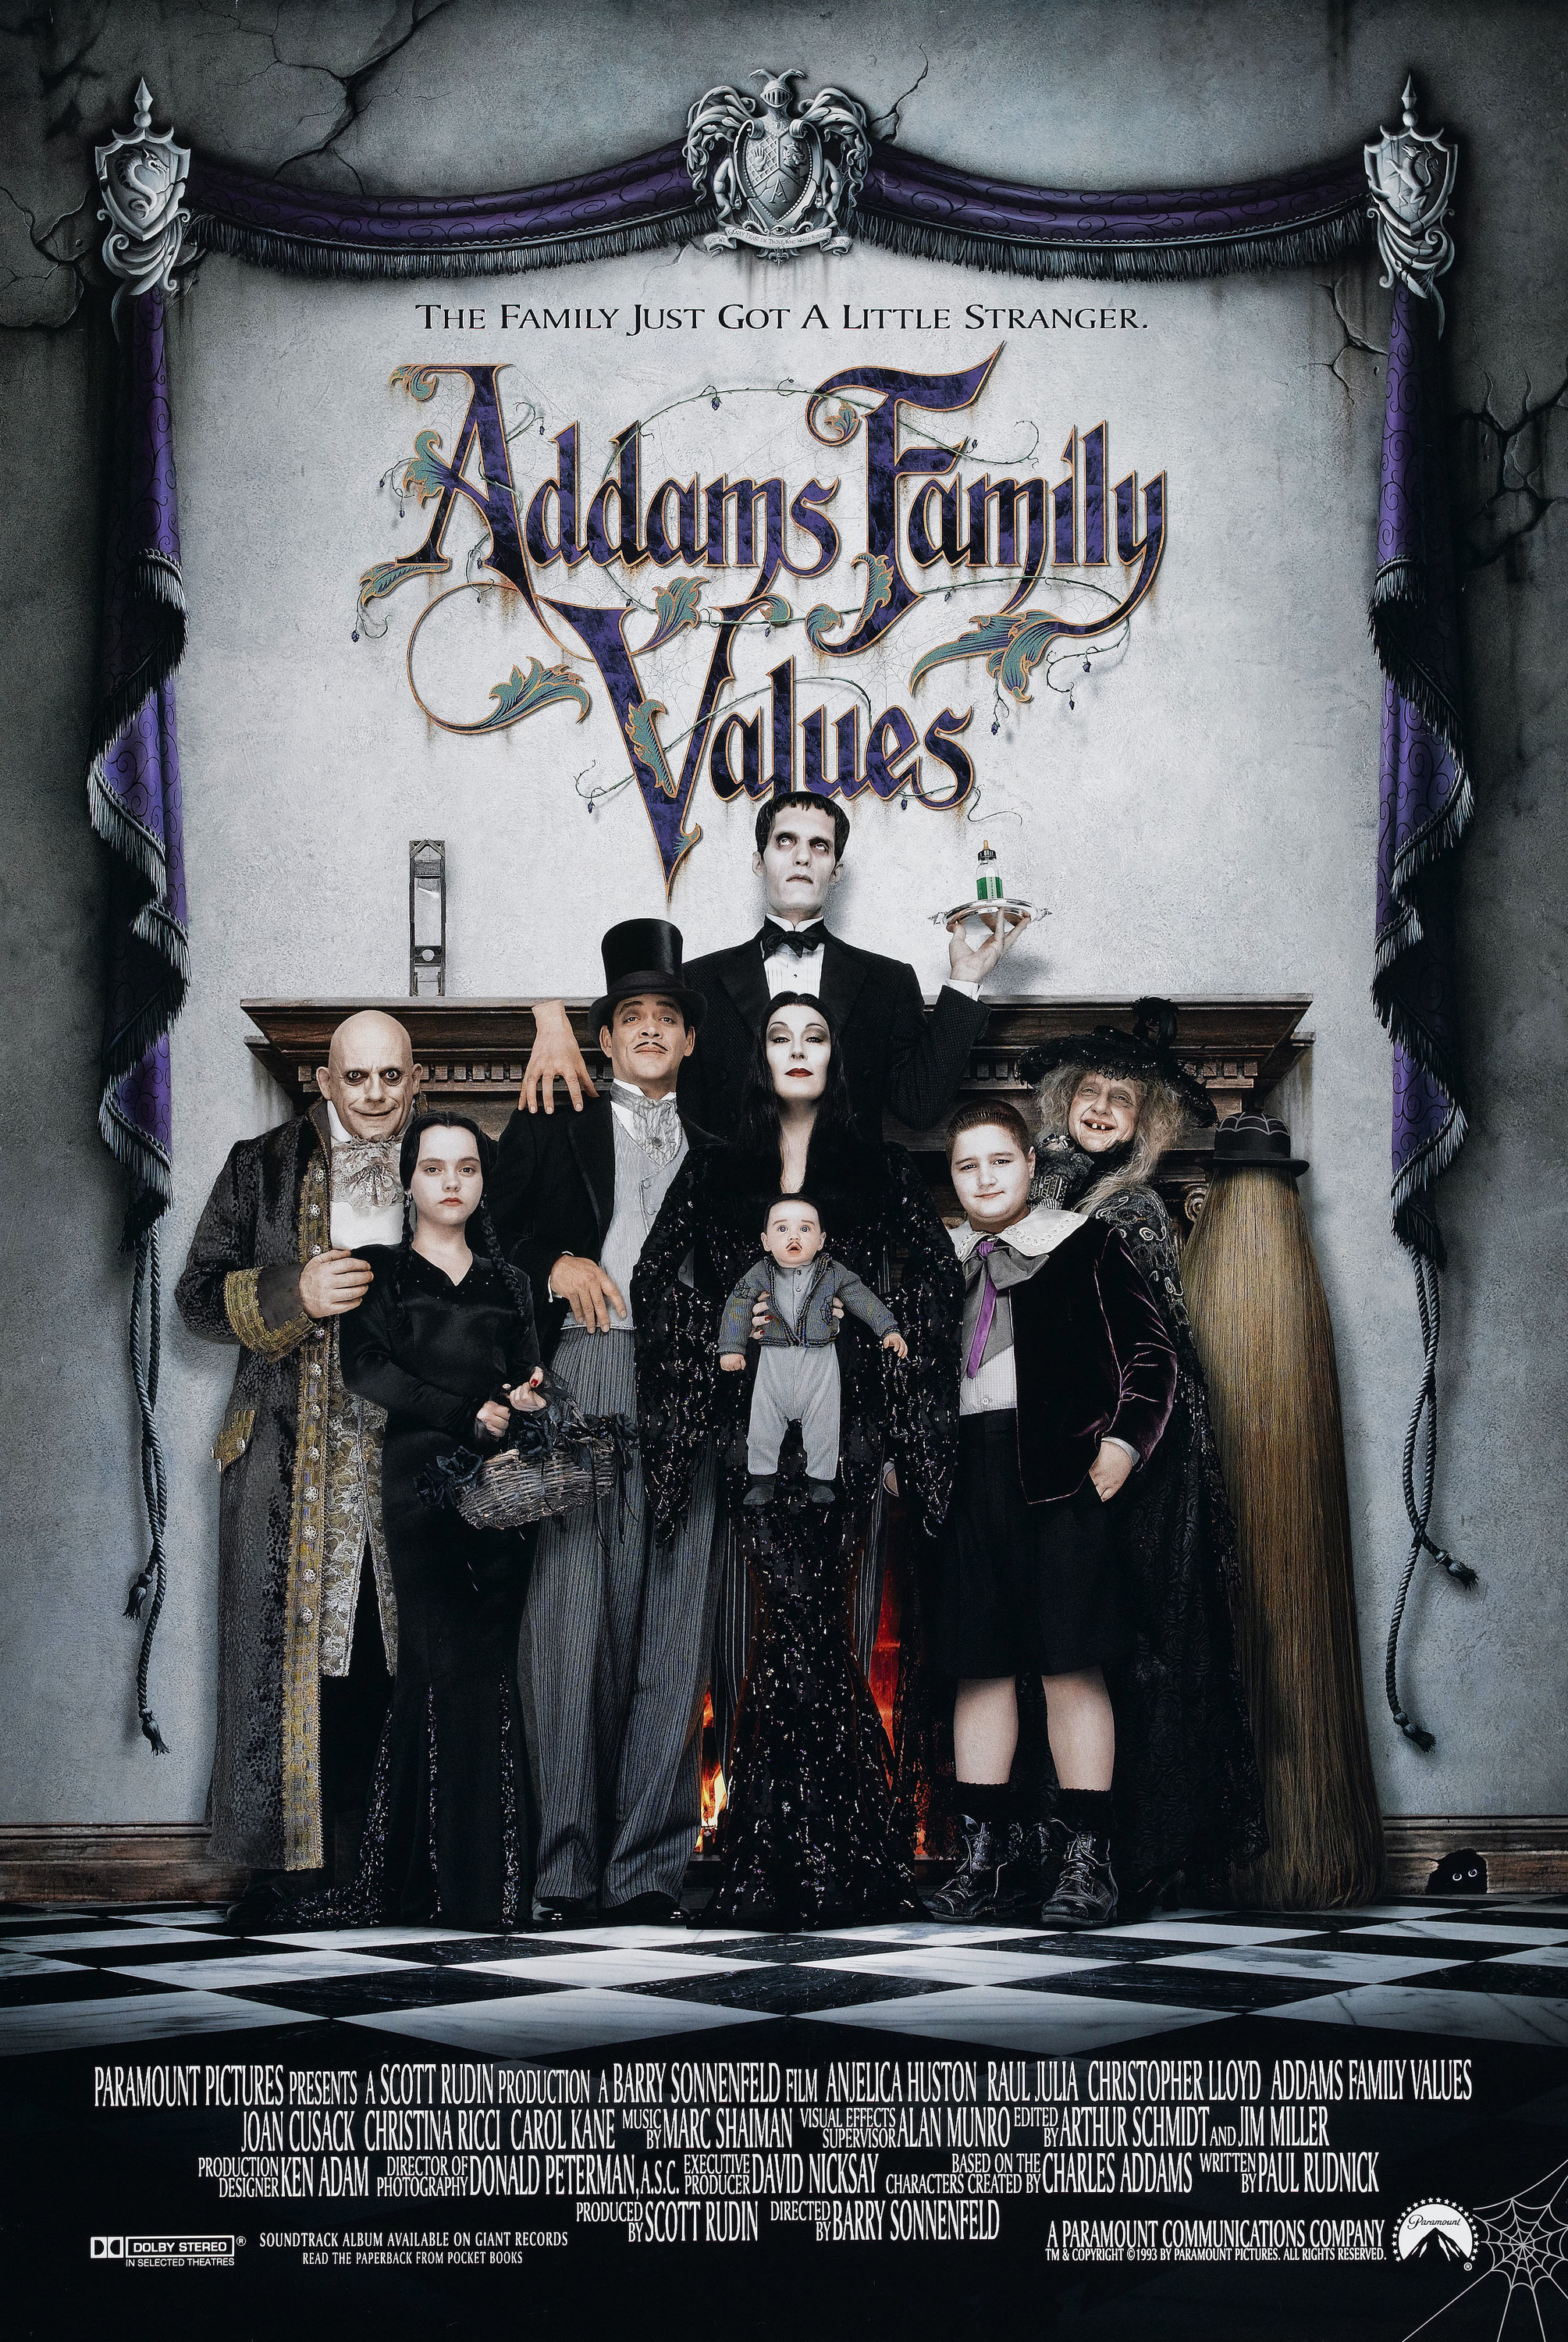 Thing (The Addams Family), Monster Moviepedia